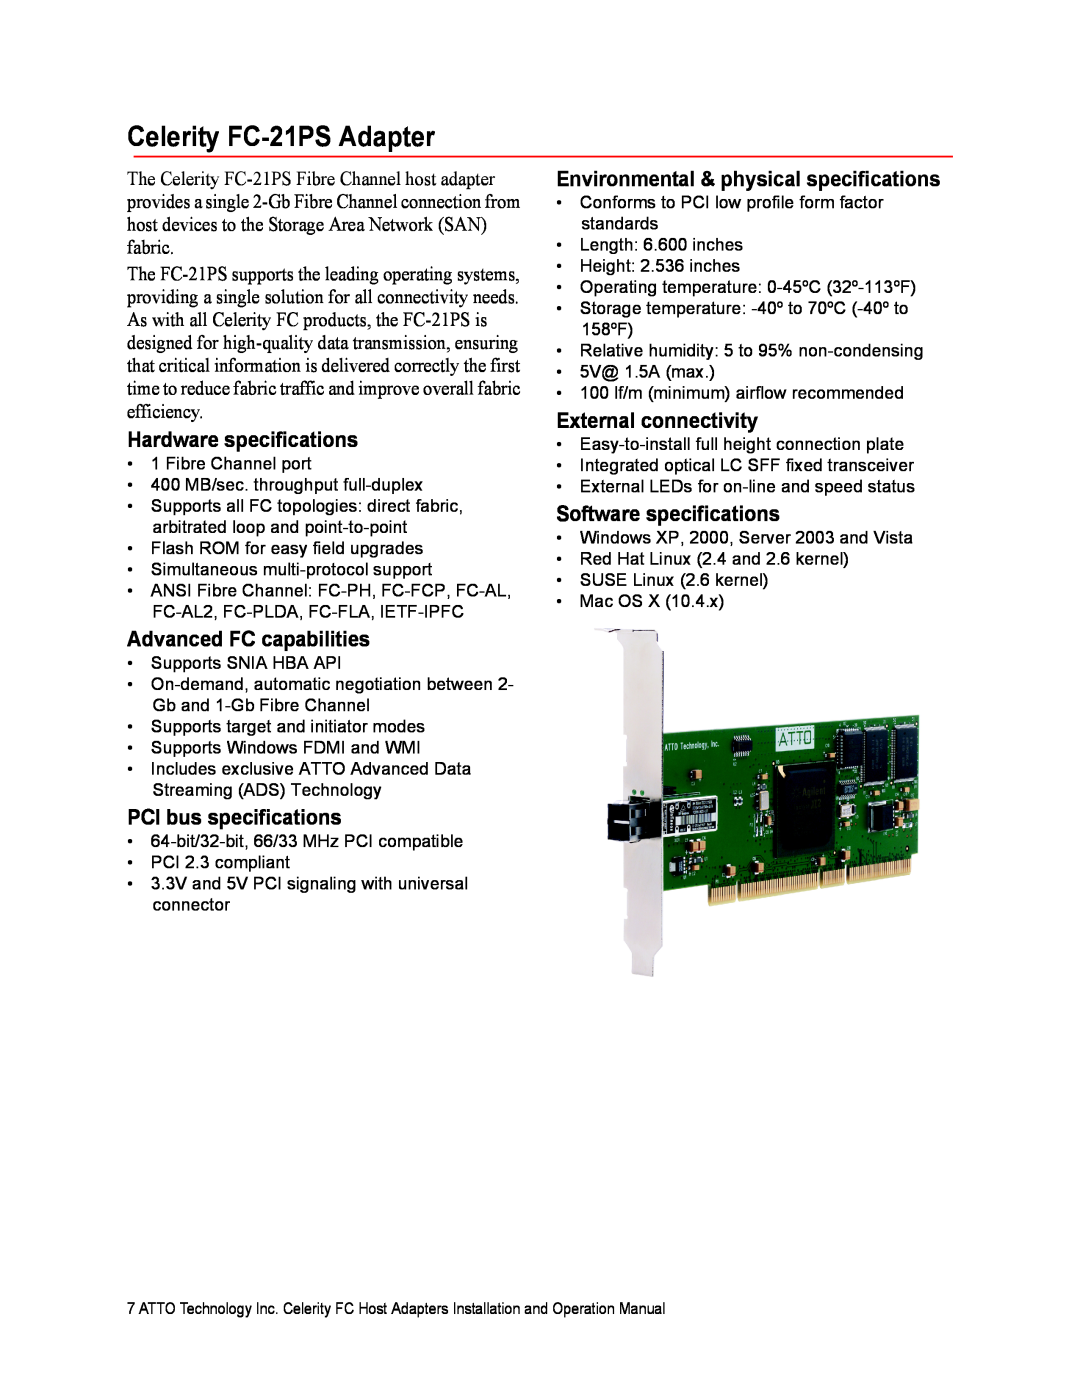 ATTO Technology Celerity FC-21PS Adapter, Hardware specifications, Advanced FC capabilities, PCI bus specifications 